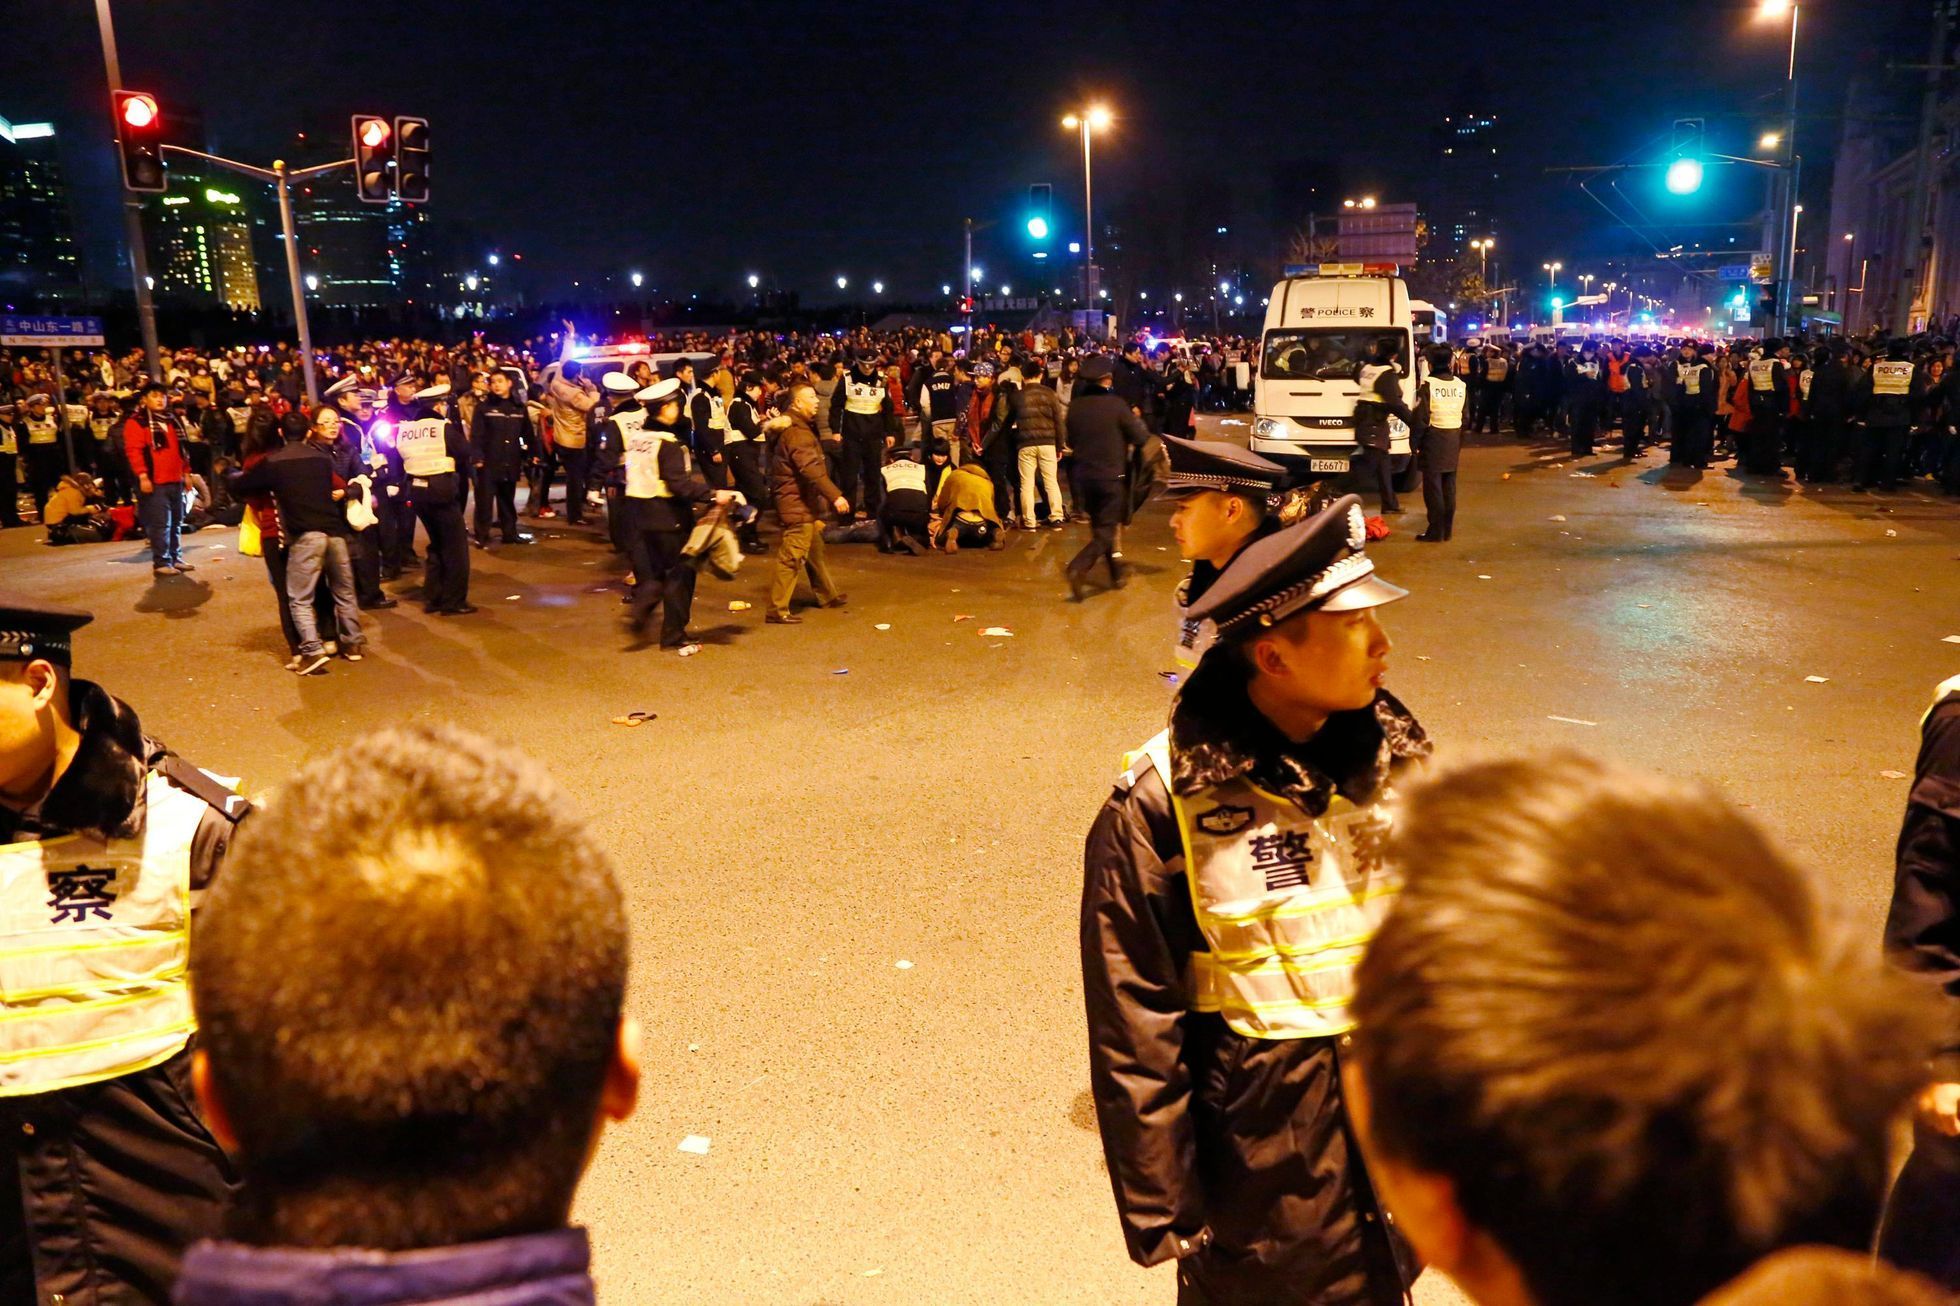 Police control the site of a stampede that occurred during a New Year's celebration on the Bund, in central Shanghai